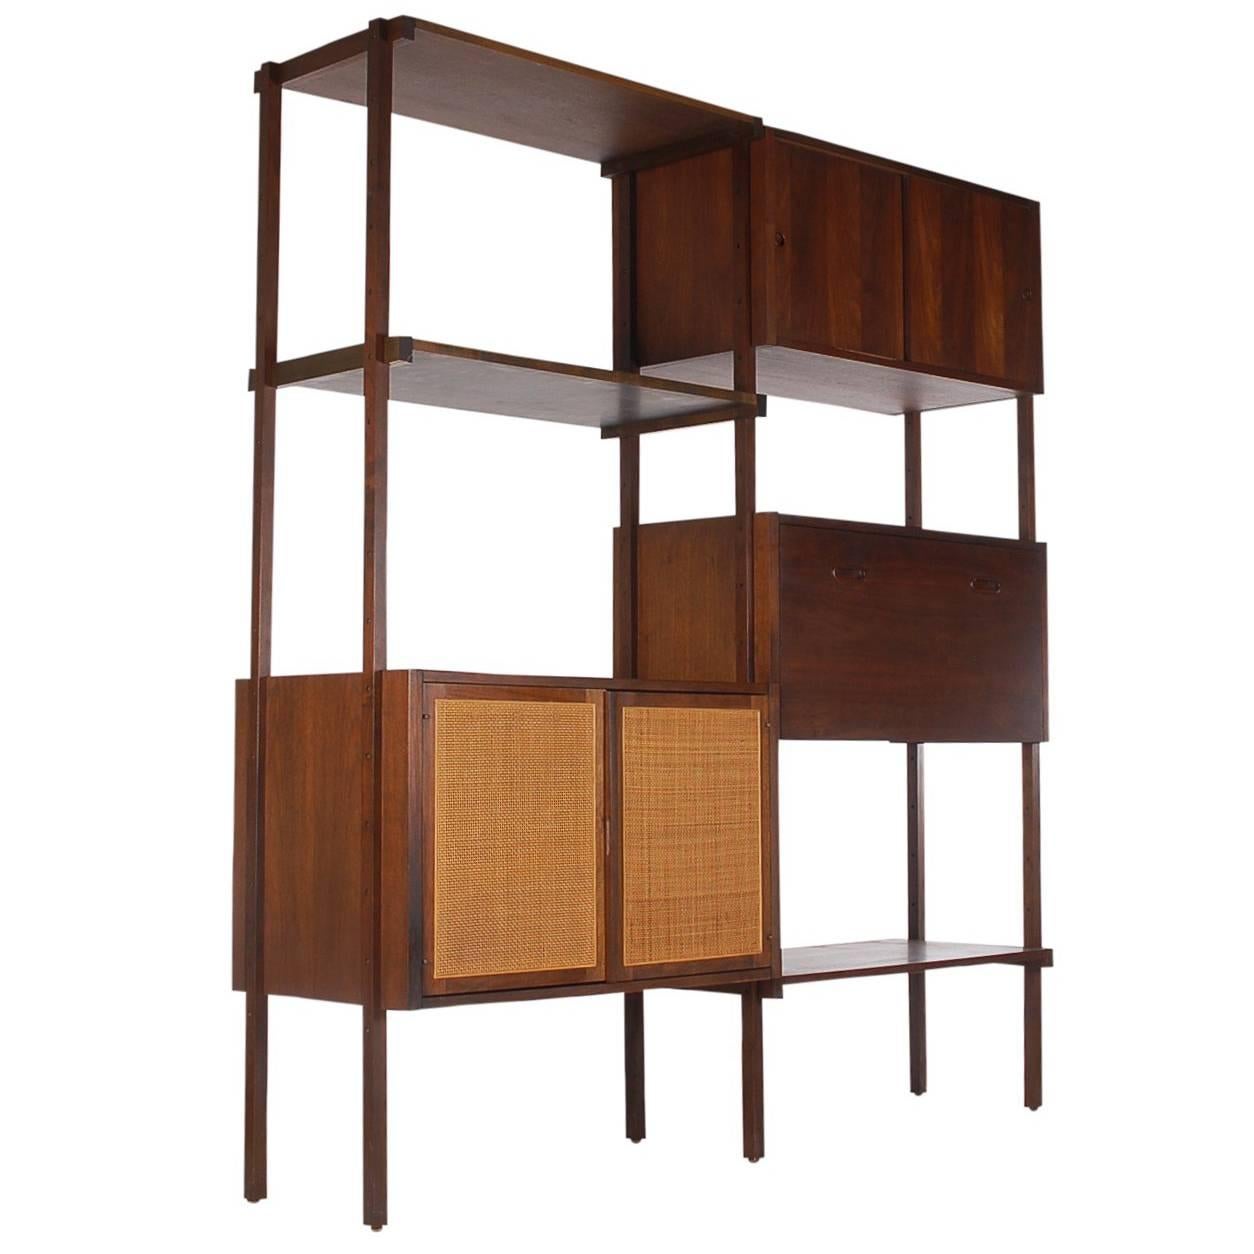 Mid-Century Modern Danish Style Wall Unit or Book Shelf in Walnut and Cane